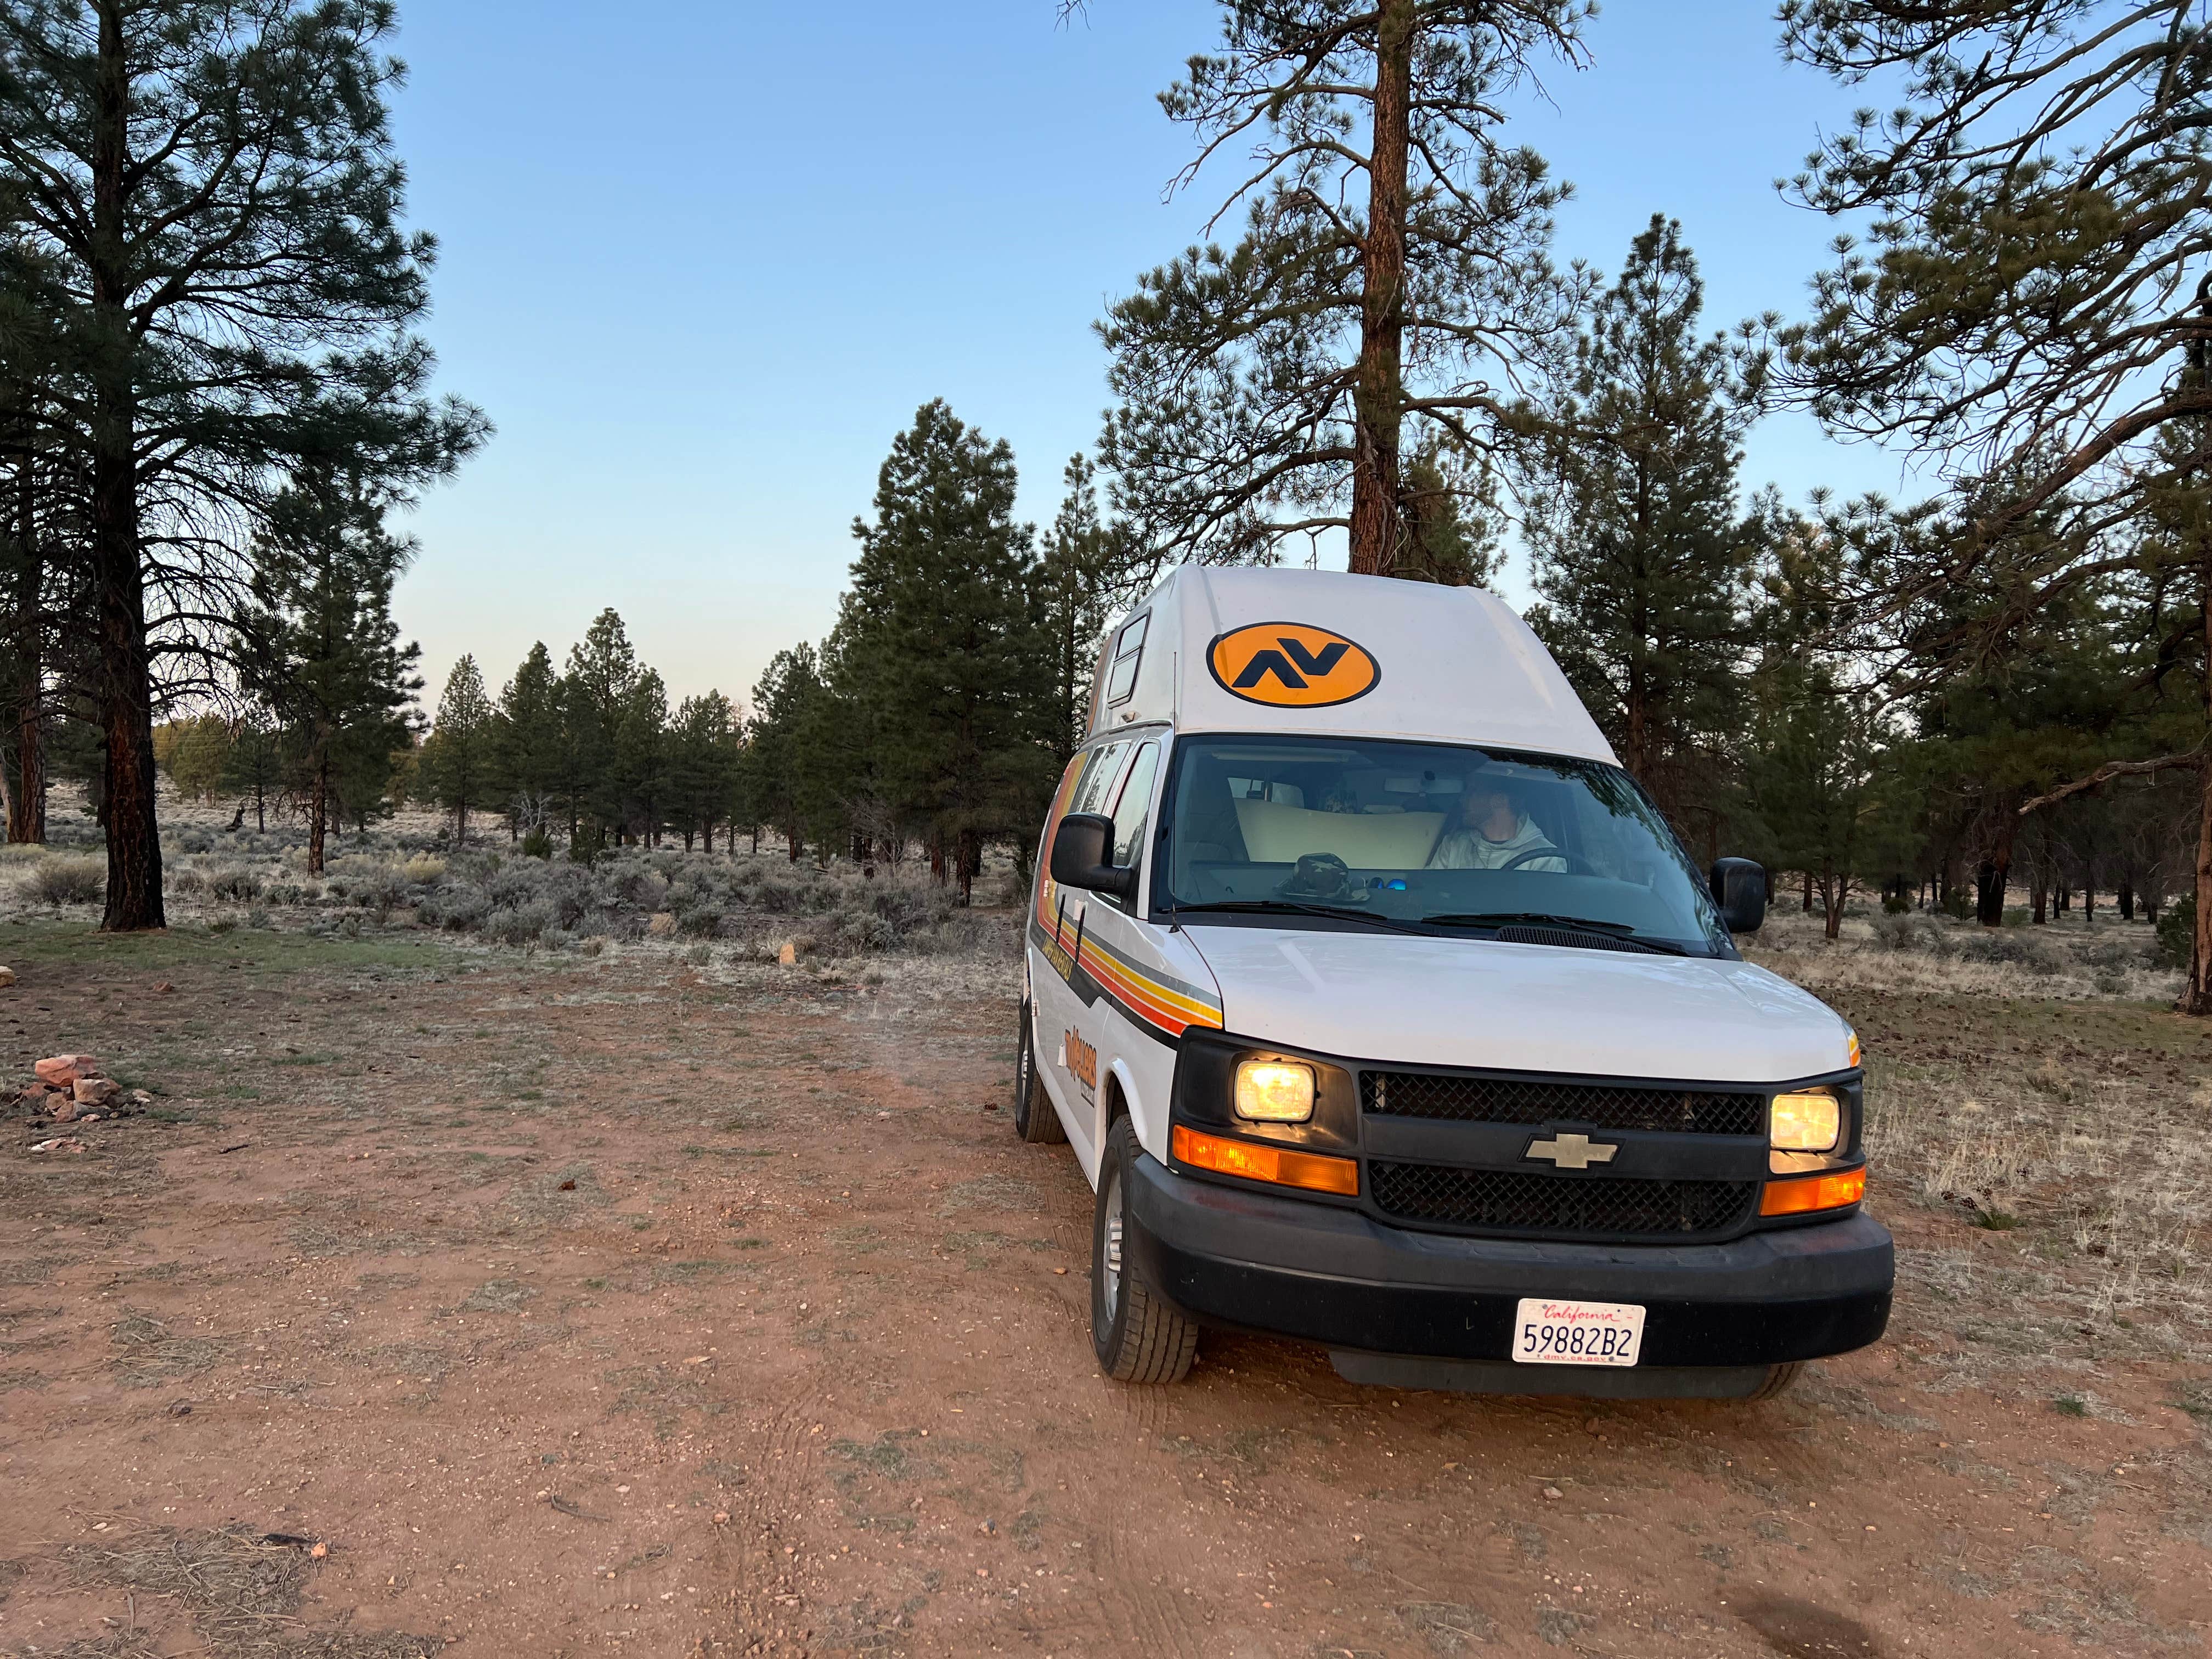 Camper submitted image from Fire Road 688 - 1